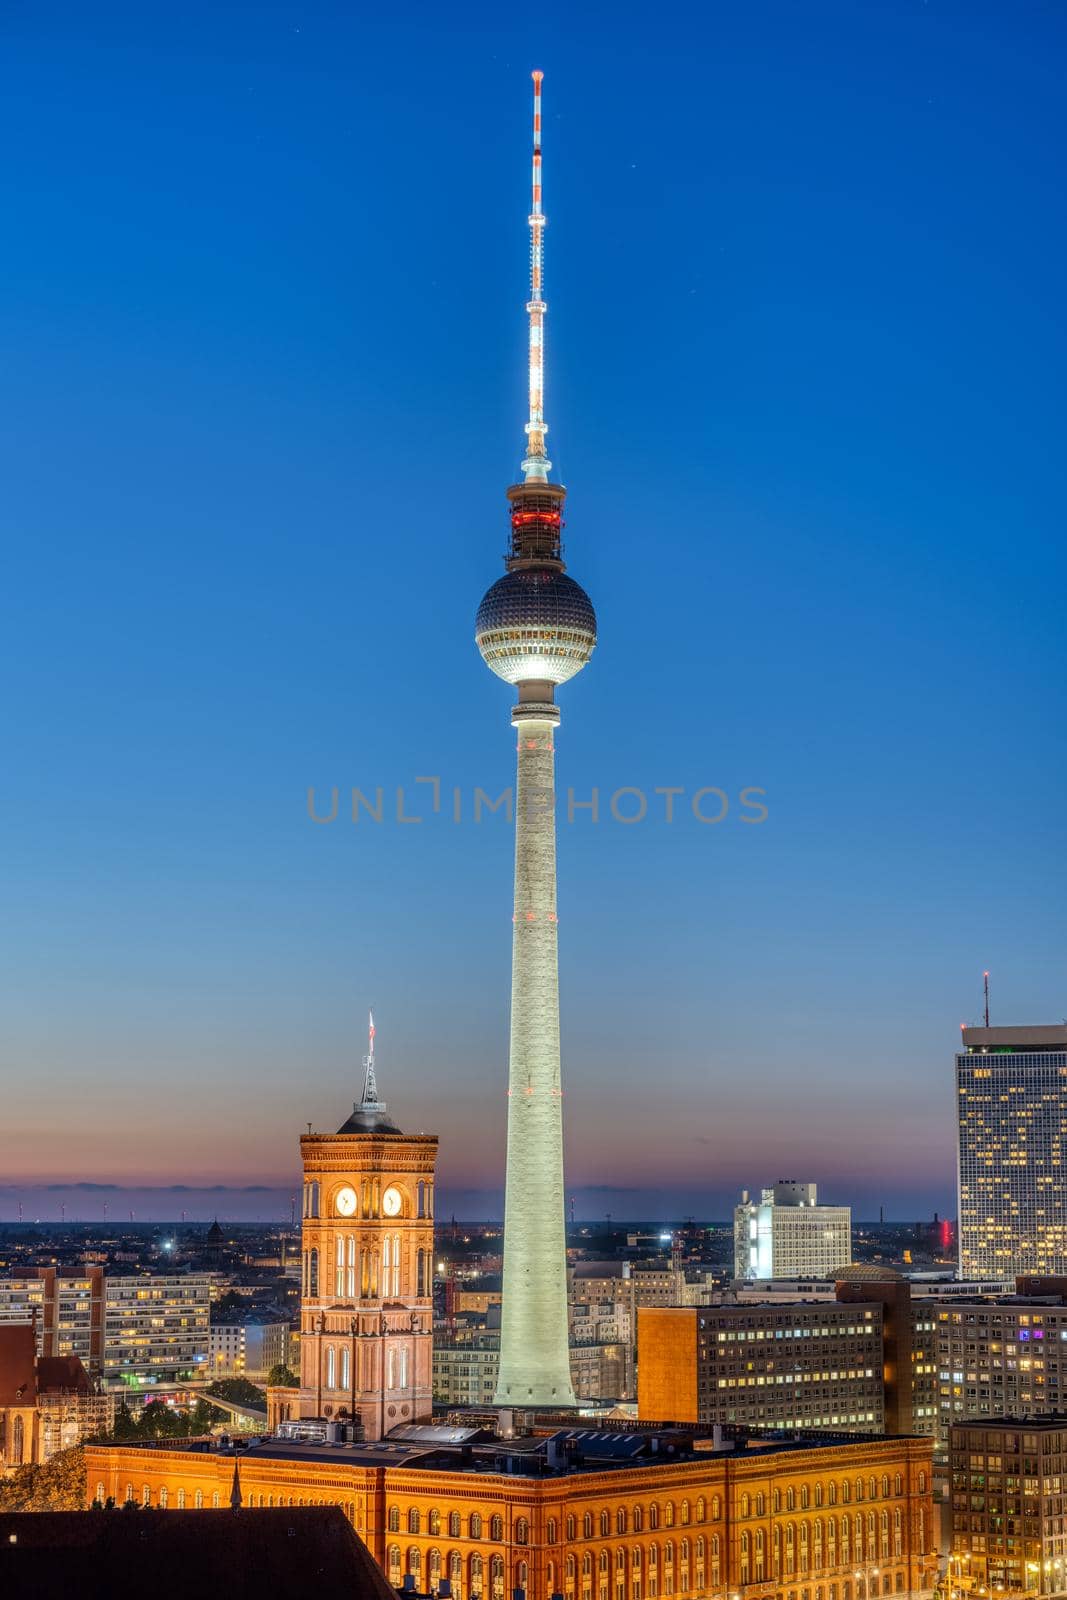 The iconic TV Tower of Berlin at night by elxeneize